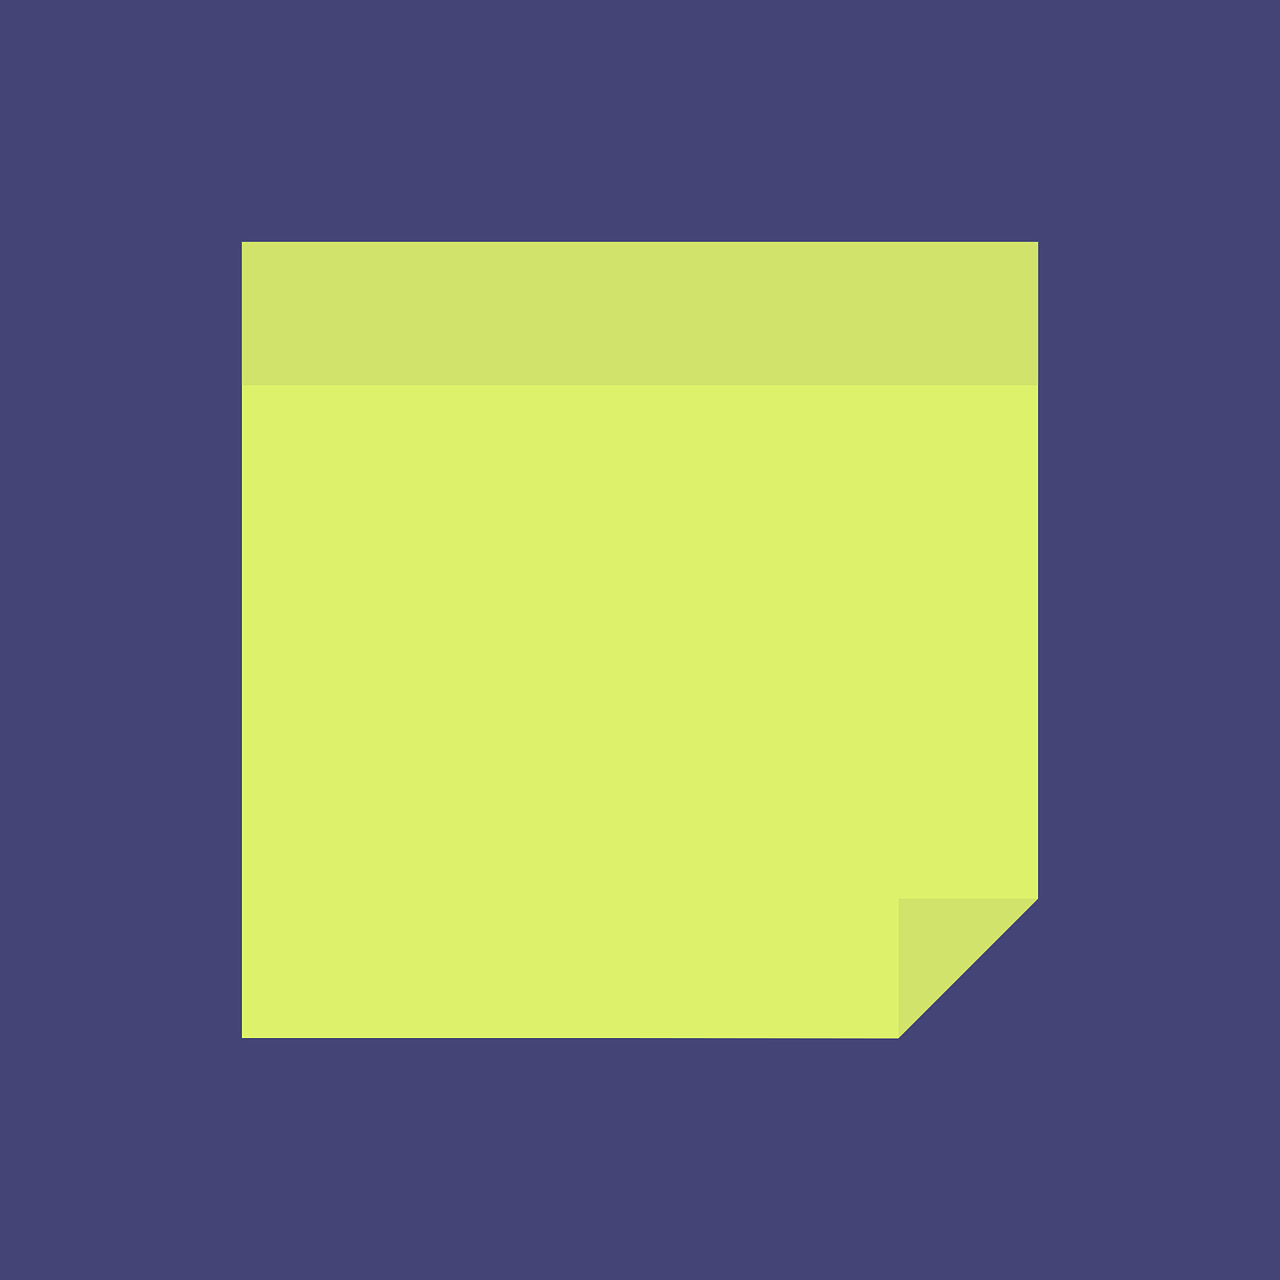 a yellow post it on a blue background, by James Bard, digital art, green and purple, flat icon, nongraphic, documentation